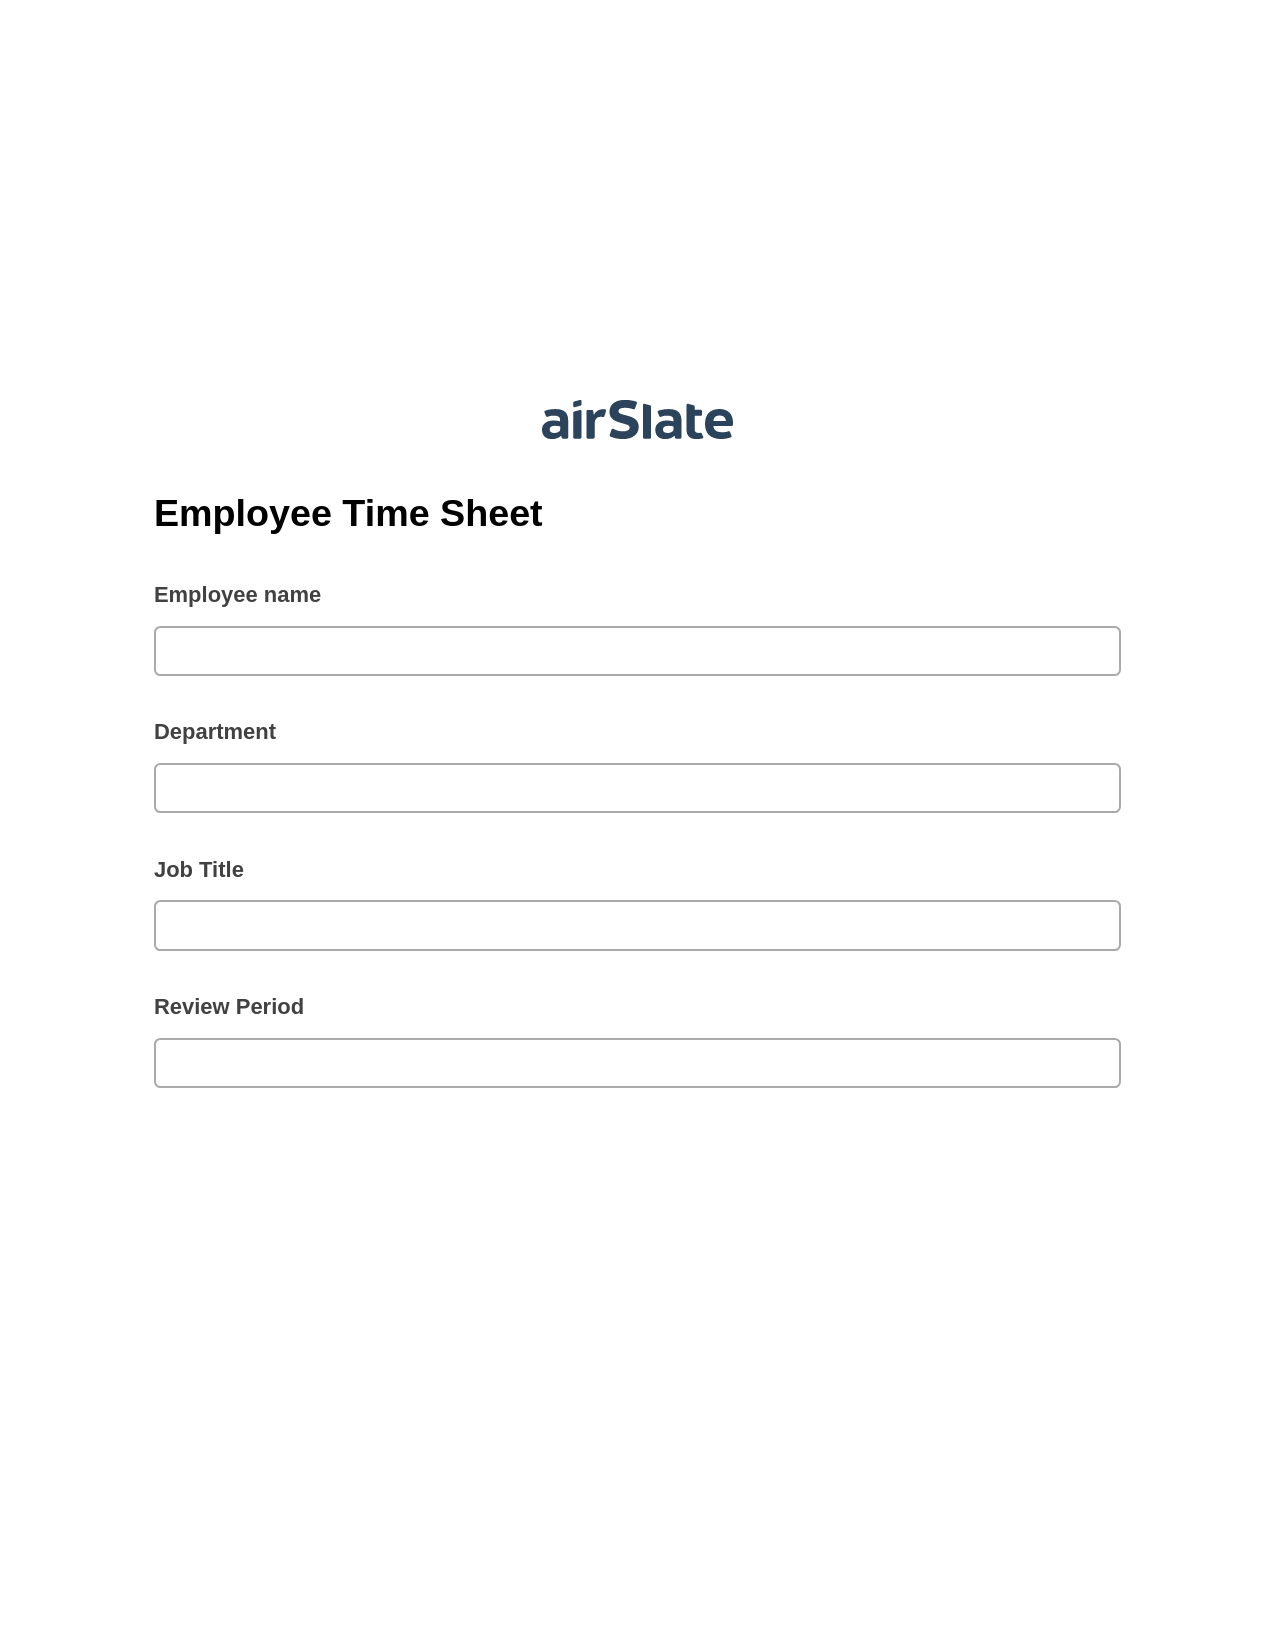 Employee Time Sheet Pre-fill from CSV File Bot, Update Audit Trail Bot, Archive to Google Drive Bot